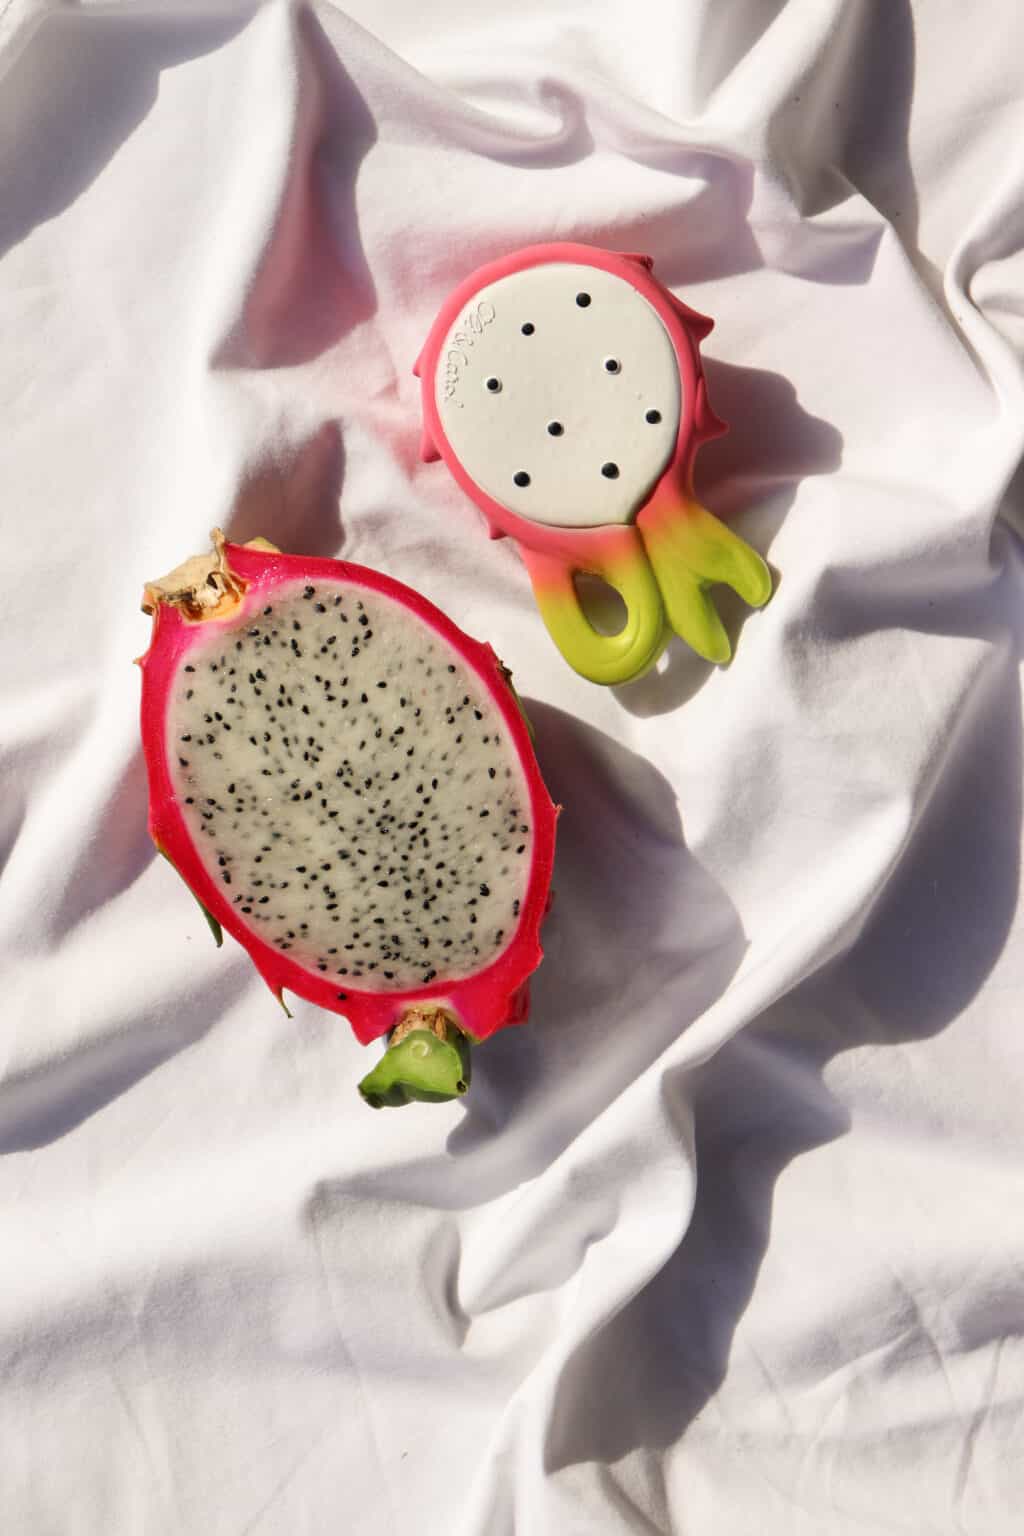 Two Oli & Carol Fucsia de Dragonfruit Baby Teether Natural Rubber shaped plates on a white cloth.